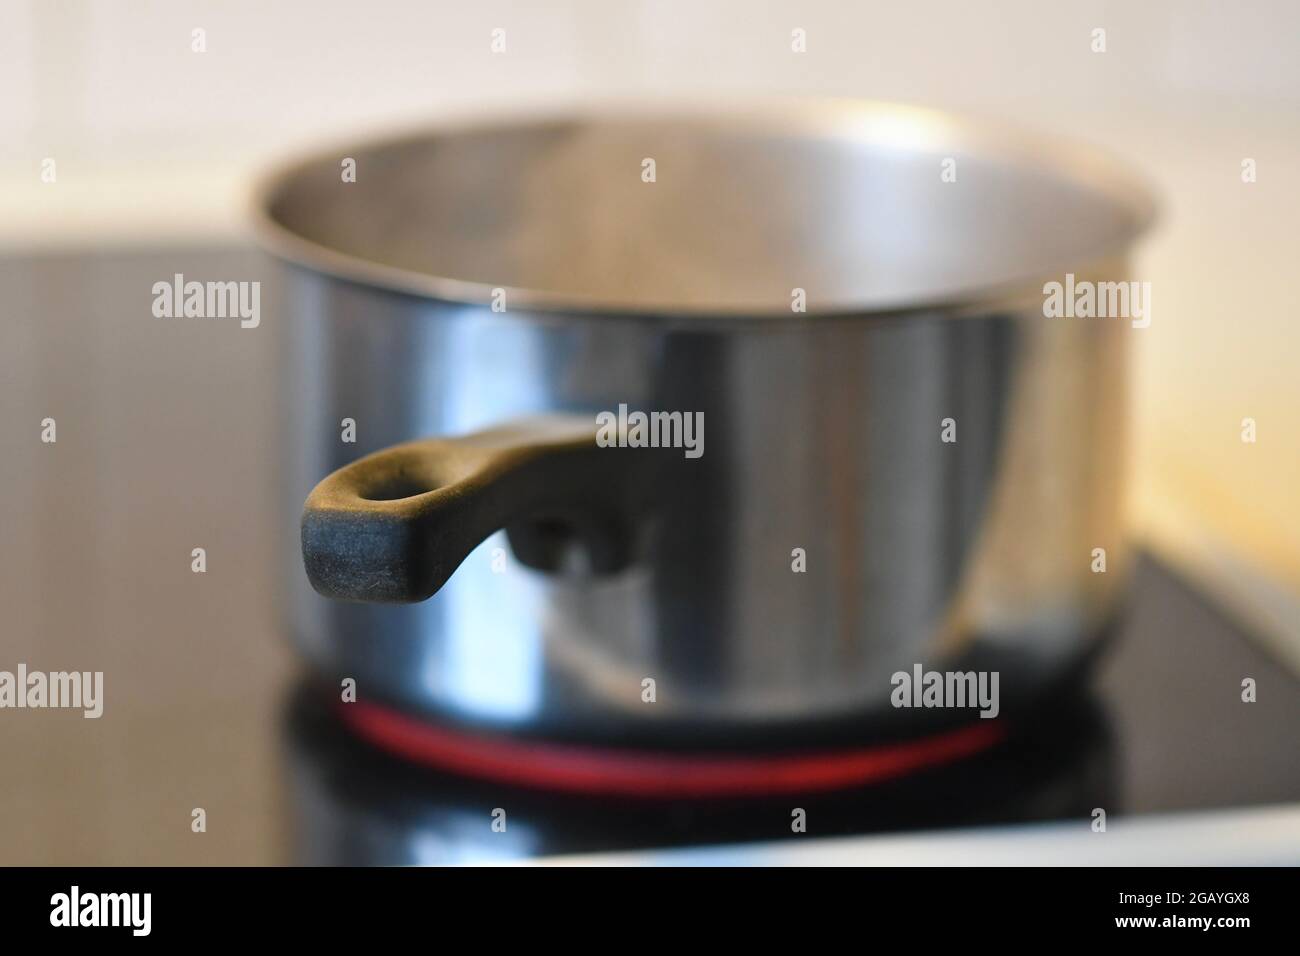 Photo of a pot on stove in kitchen Stock Photo